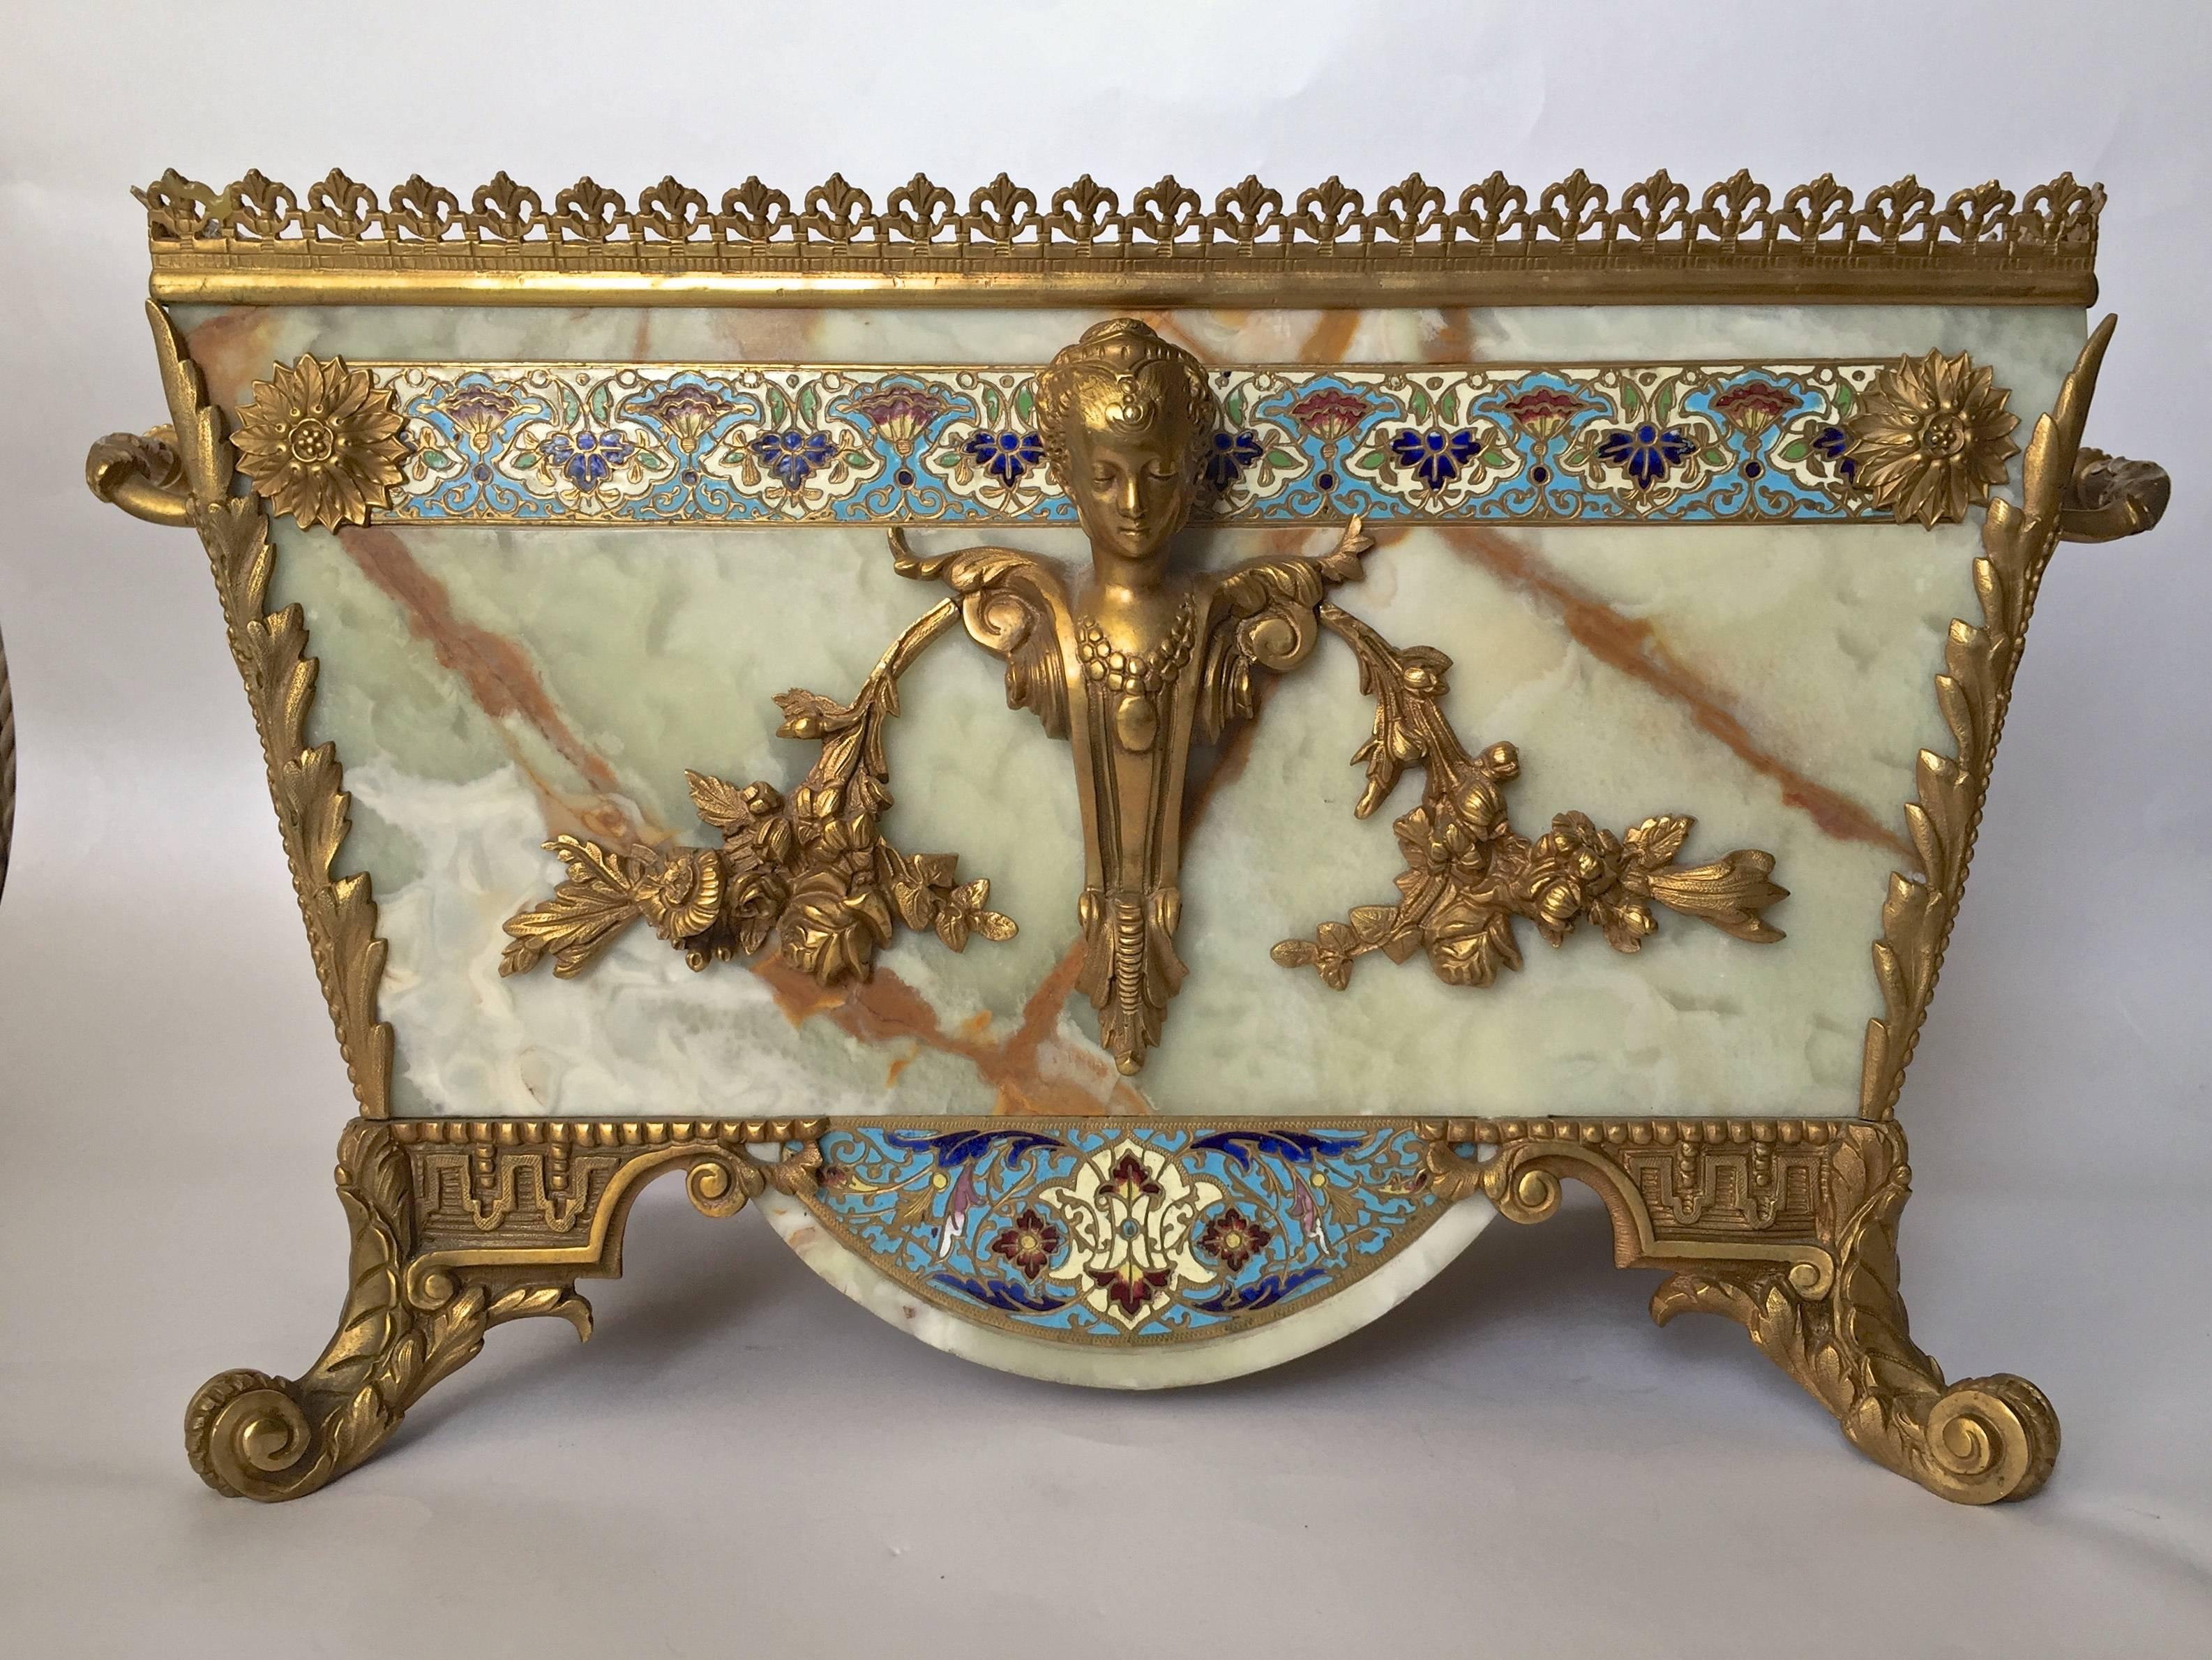 An exceptional Jardiniere on stand of champleve enamels with onyx, marble and gilt bronze in the Louis 16th style, fantastic quality is found here wonderful decorative value as well. The Champleve is very fine and the casting and chasing of the